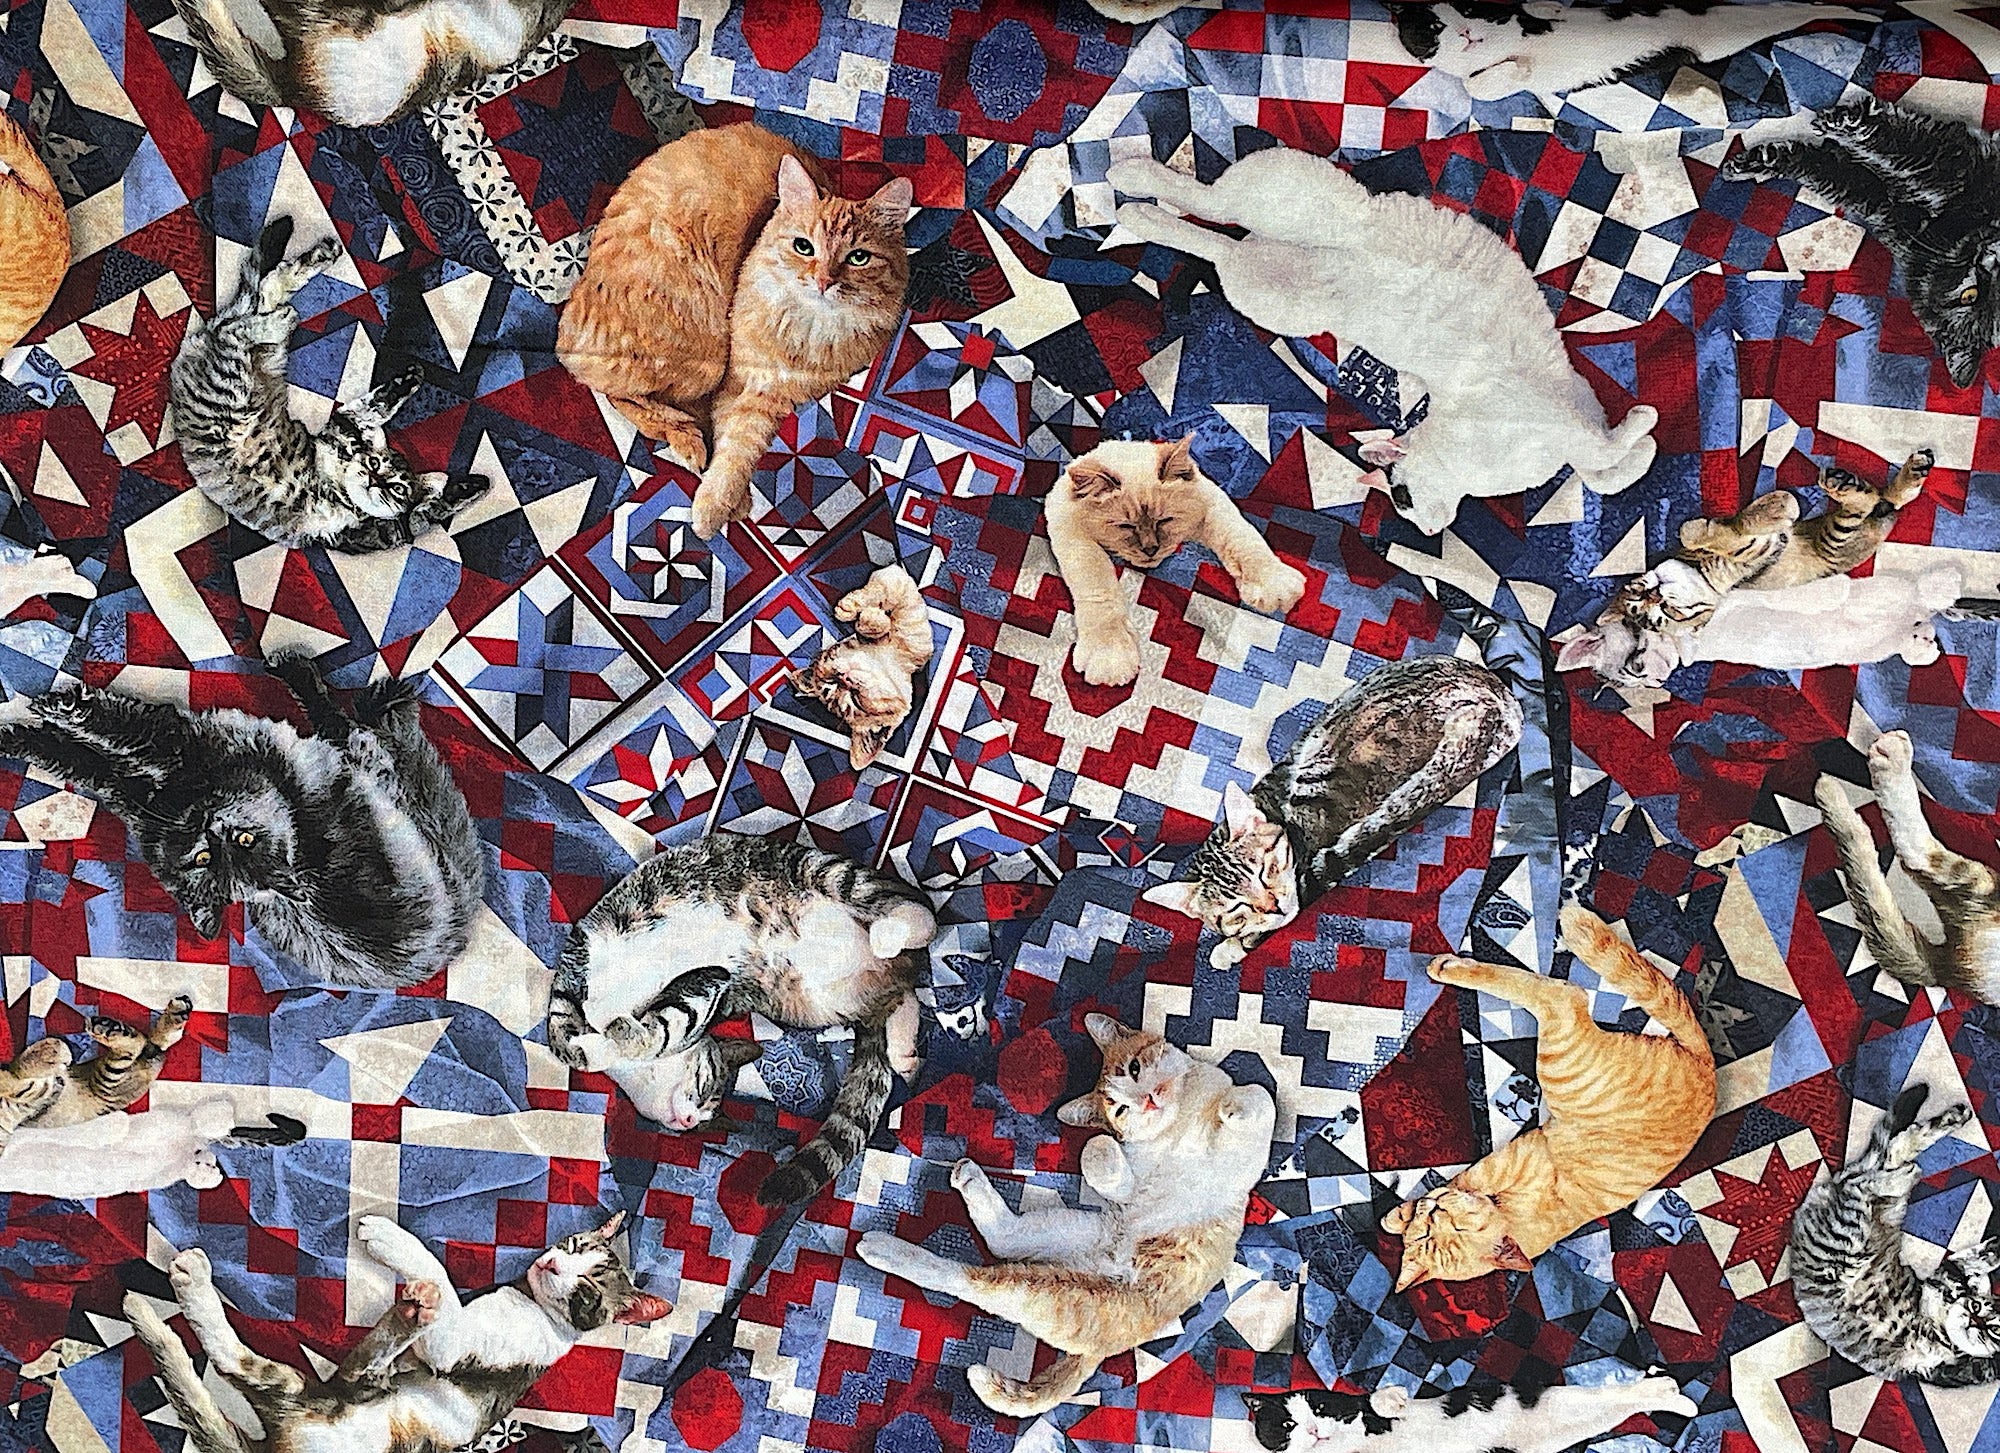 This cotton fabric looks like a quilt covered with cats.  The cats are in various poses, some of the cats are sleeping, some are stretching, others are just sprawled out with not a care in the world.